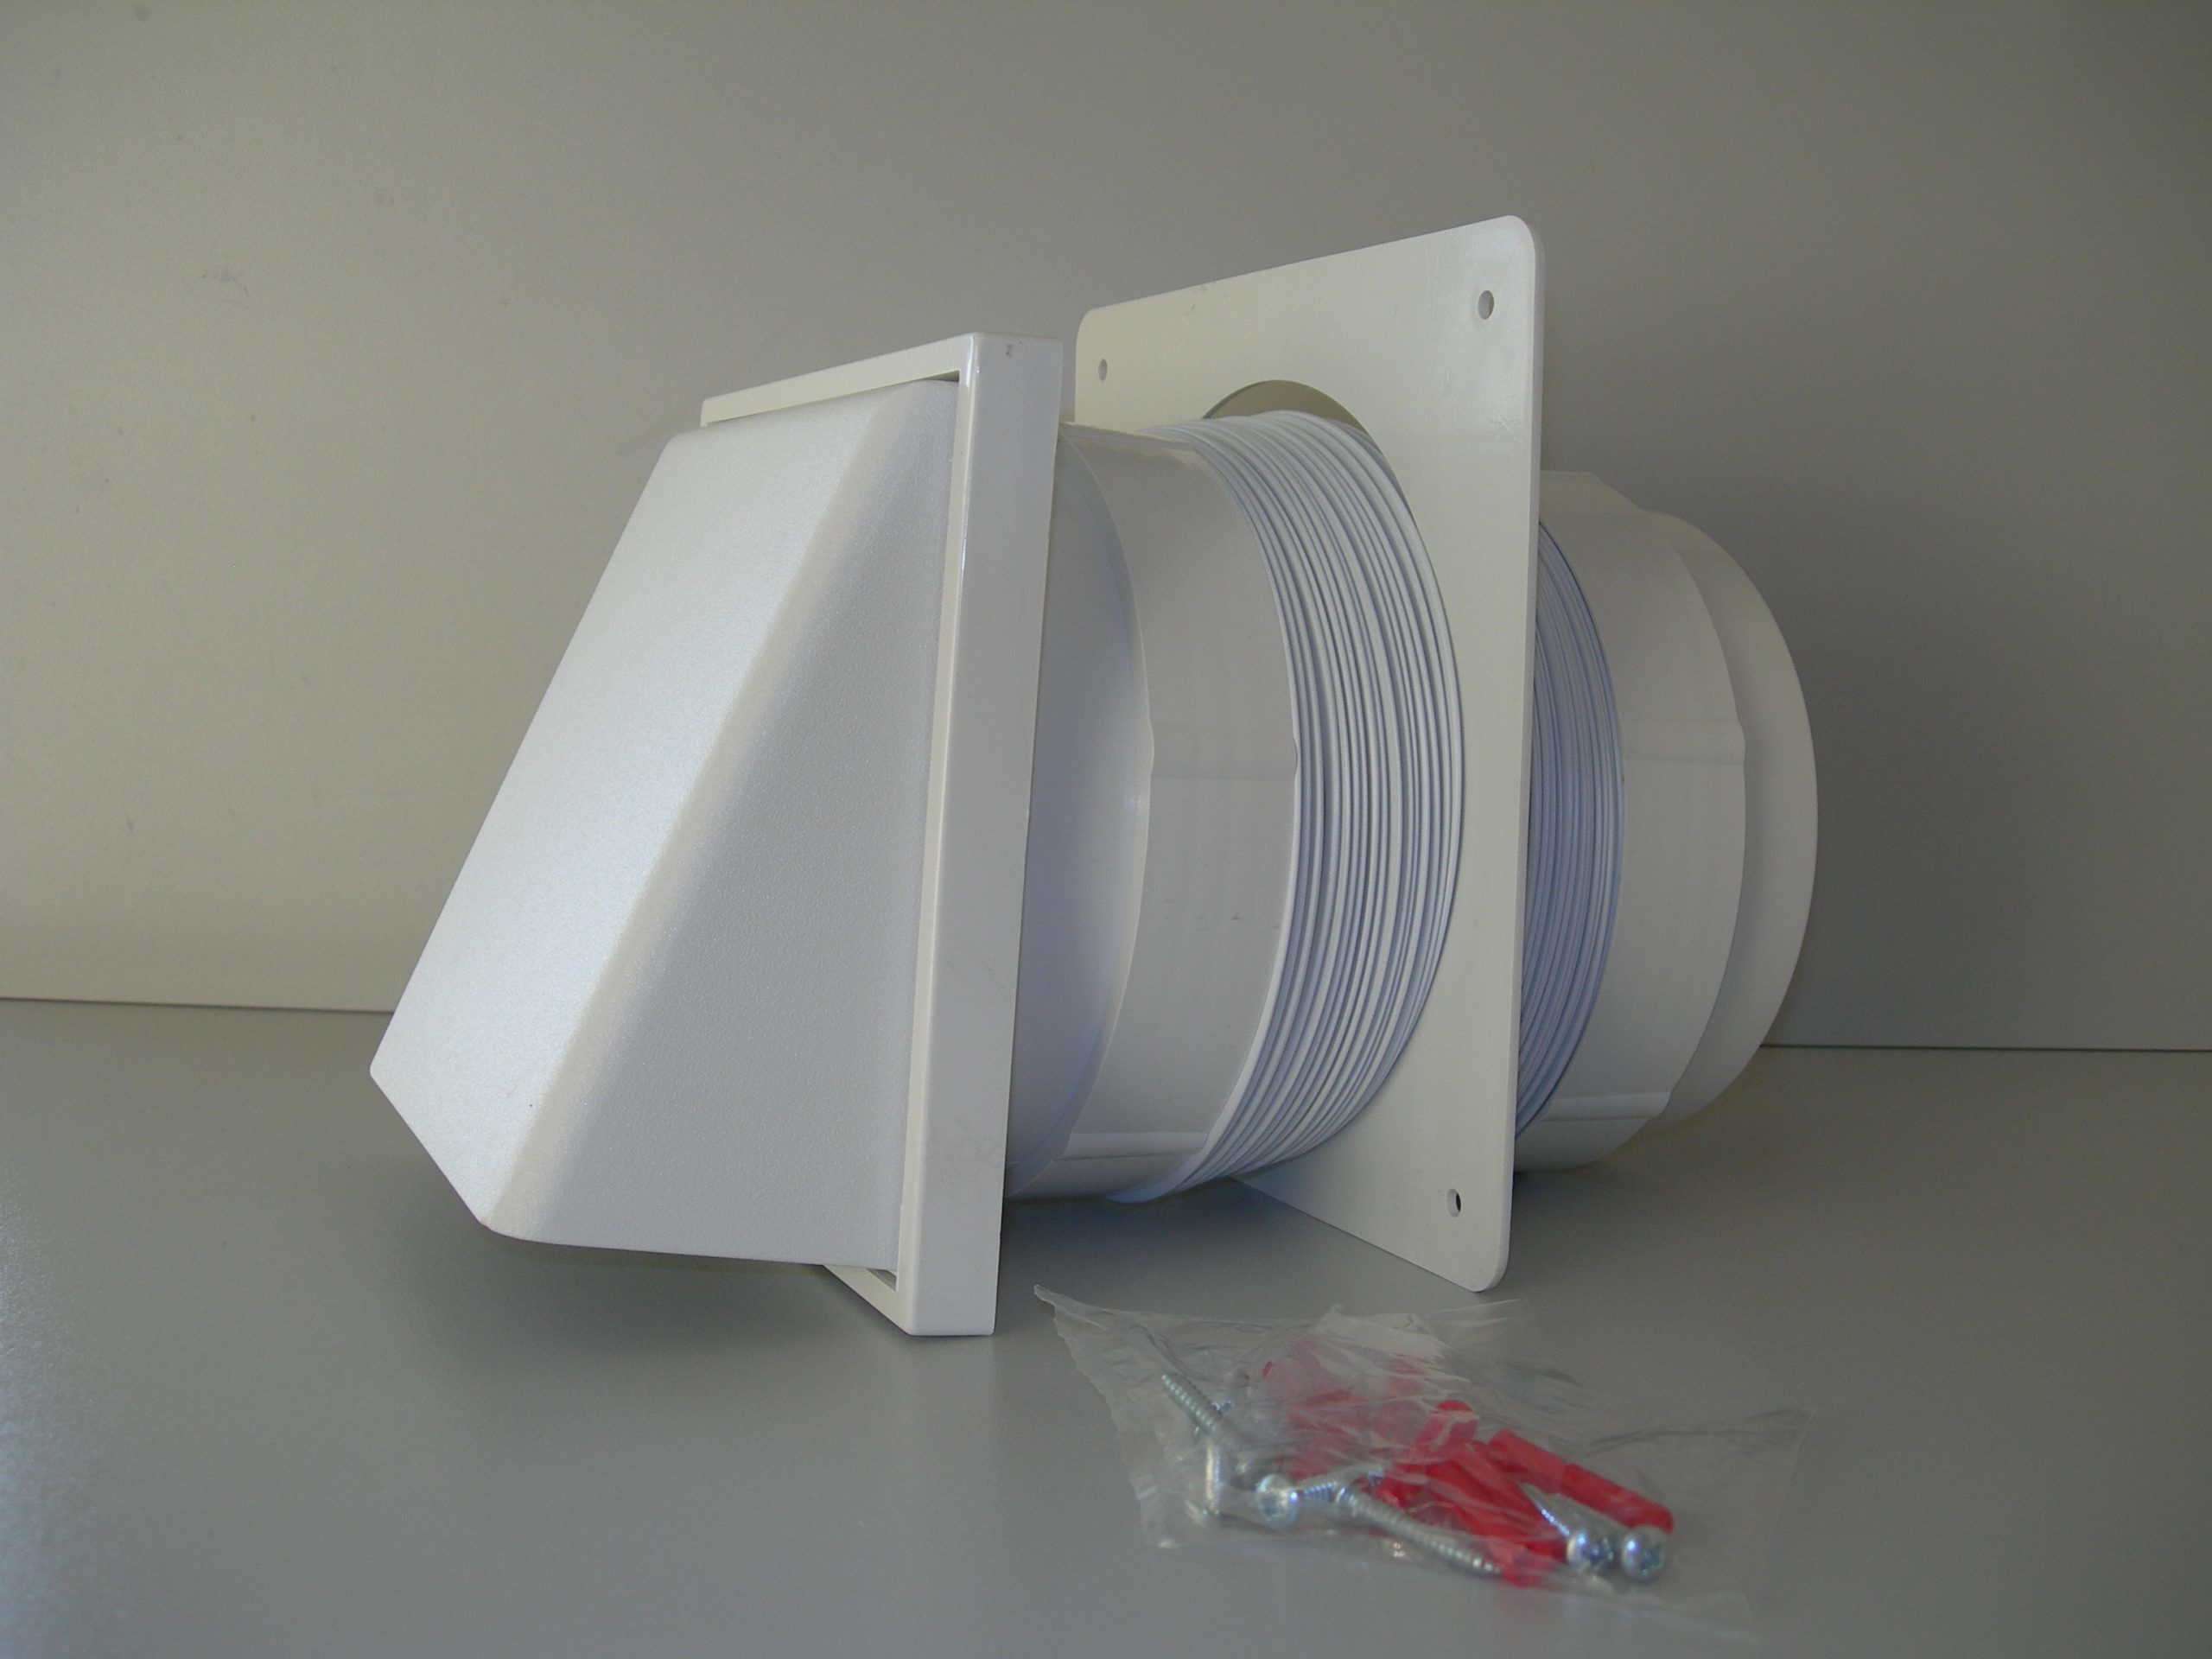 Details About Manrose Cowled Wall Grille Ventilation Kit Extraction Fan Plastic Ducting 7202w throughout size 3072 X 2304